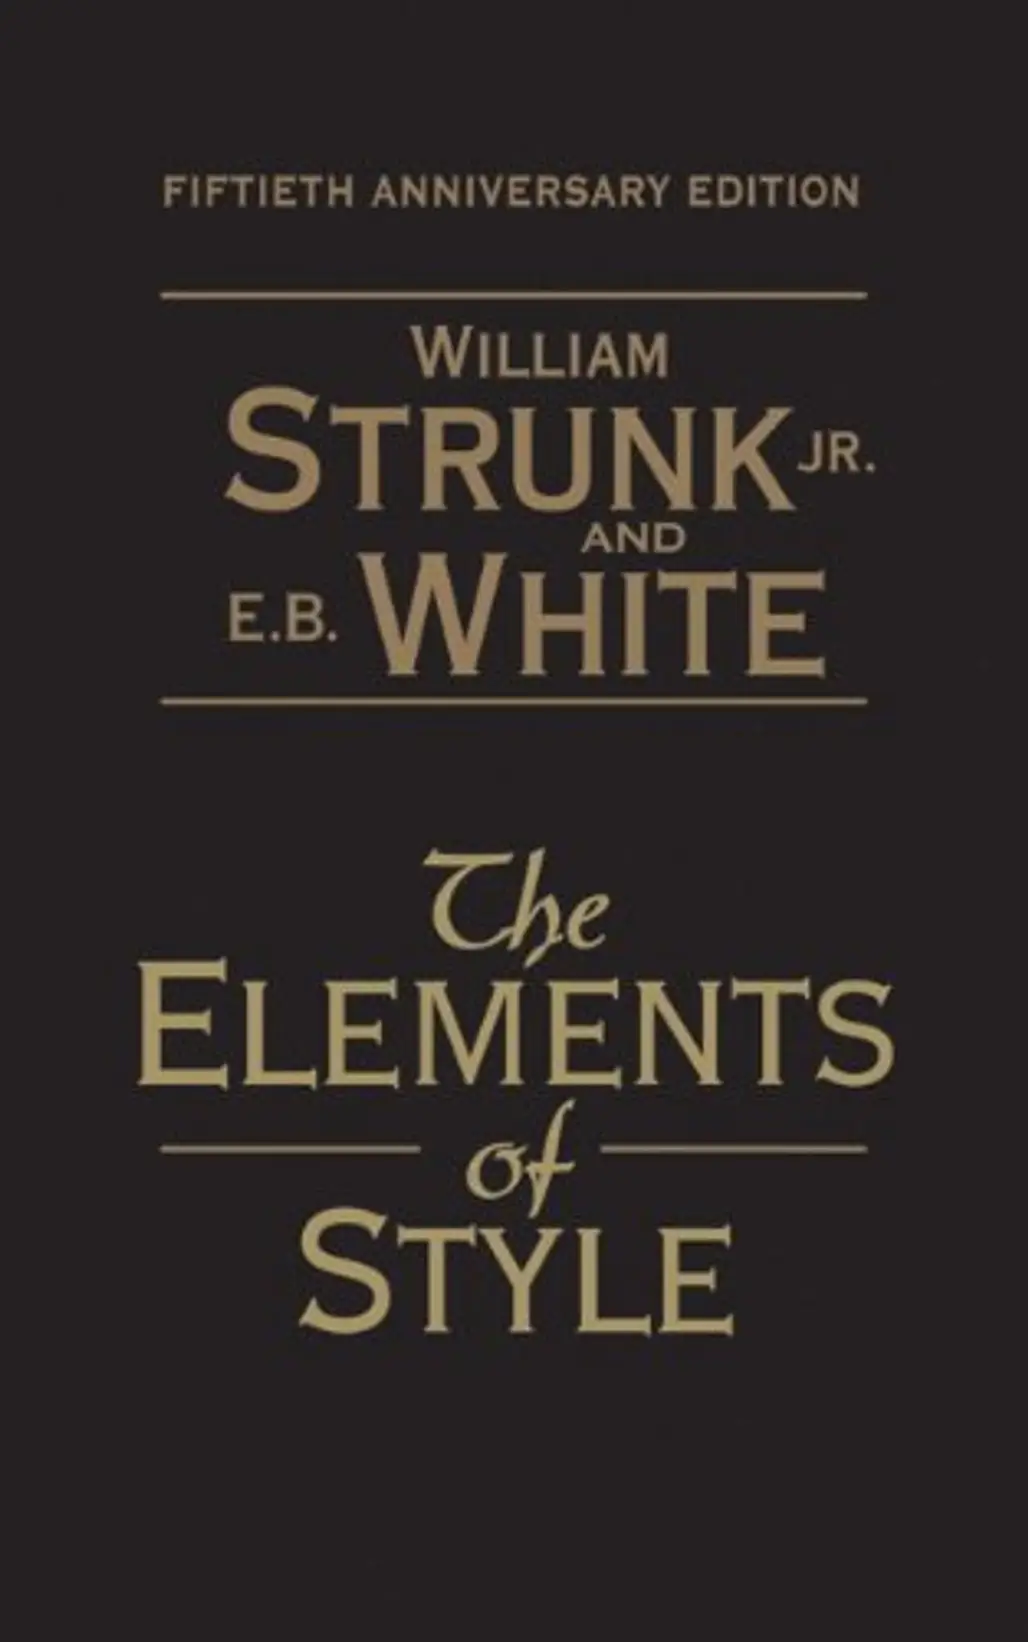 “the Elements of Style” by William Strunk and E.B. White